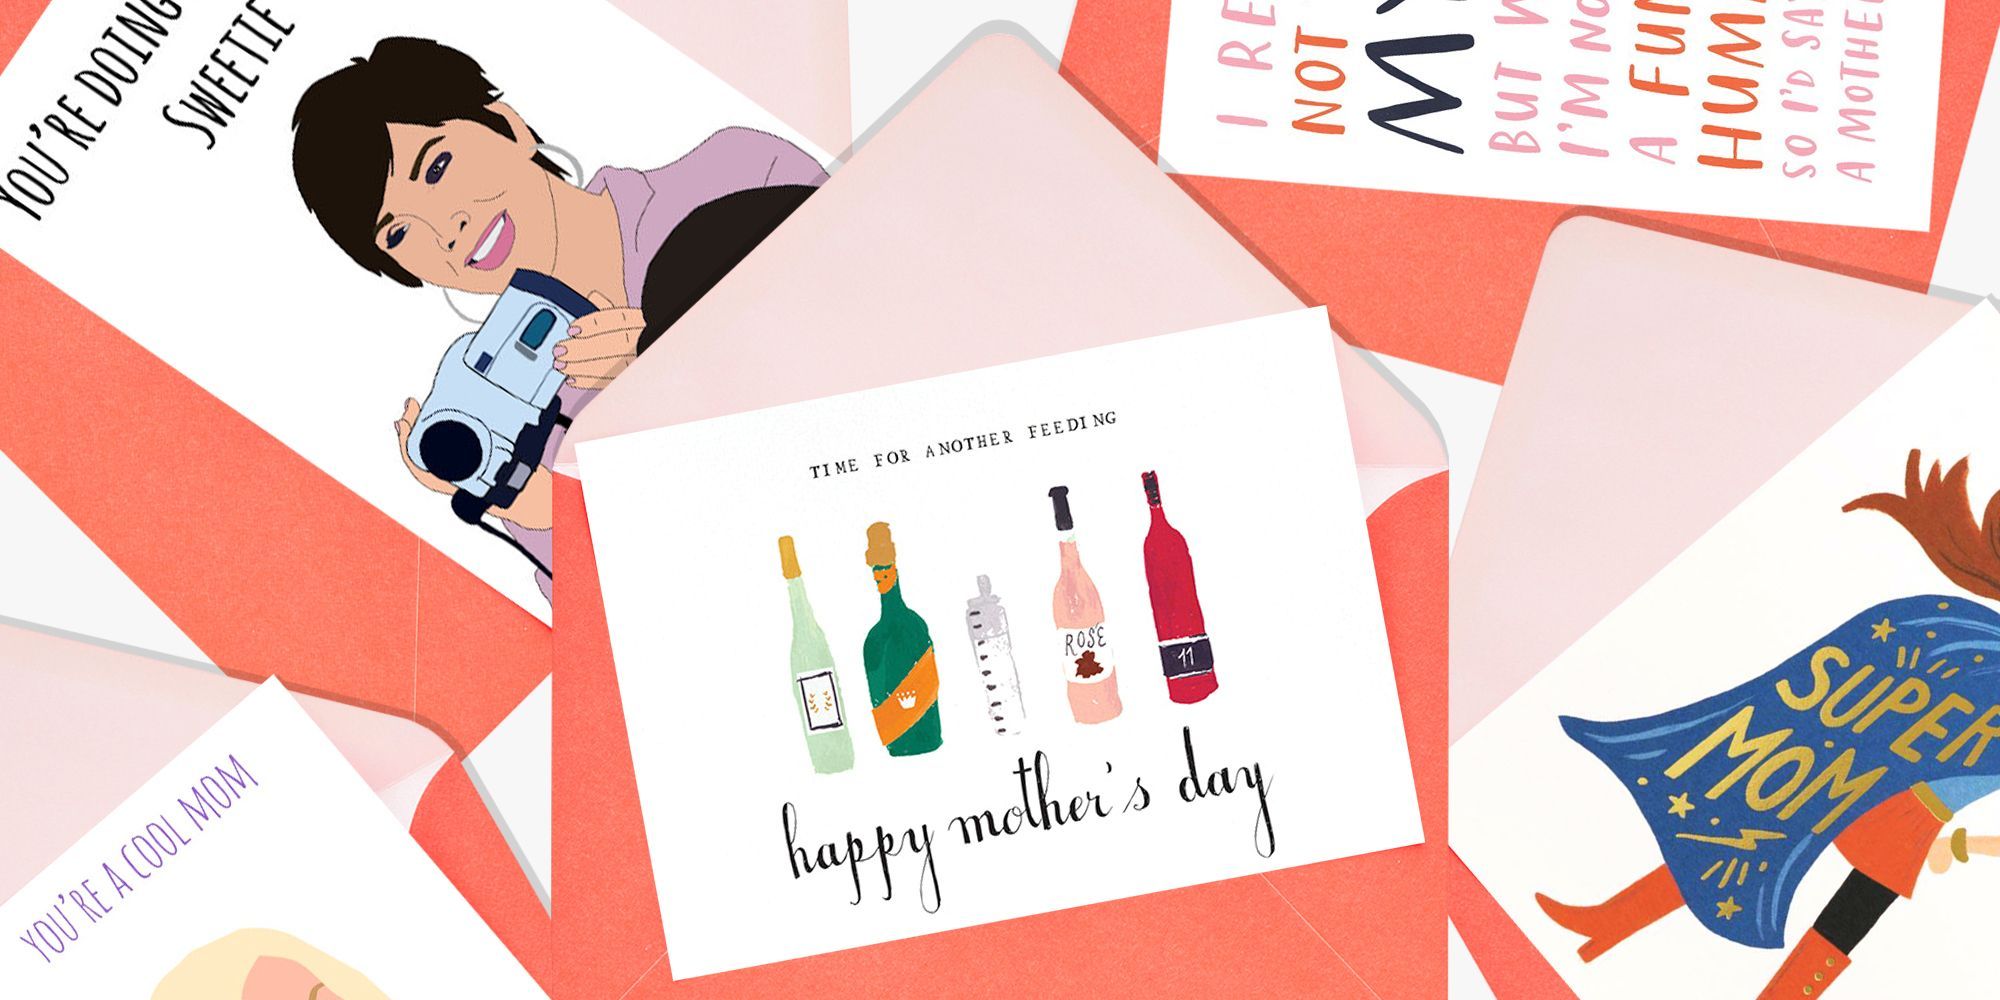 Last Minute Gift Ideas for Mother's Day — The Mod Woman